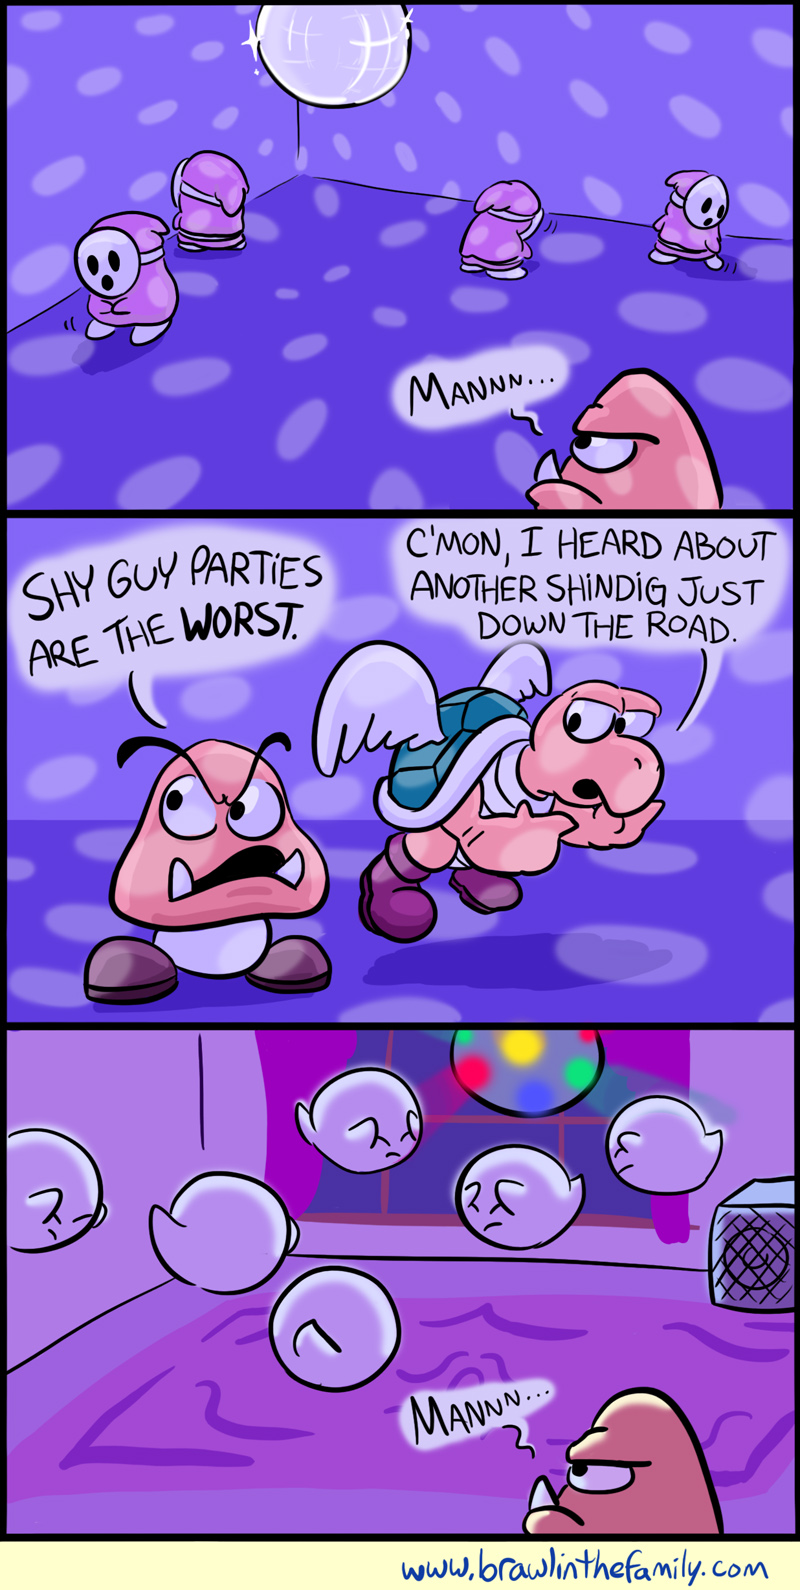 At least it's better than Thwomp parties.